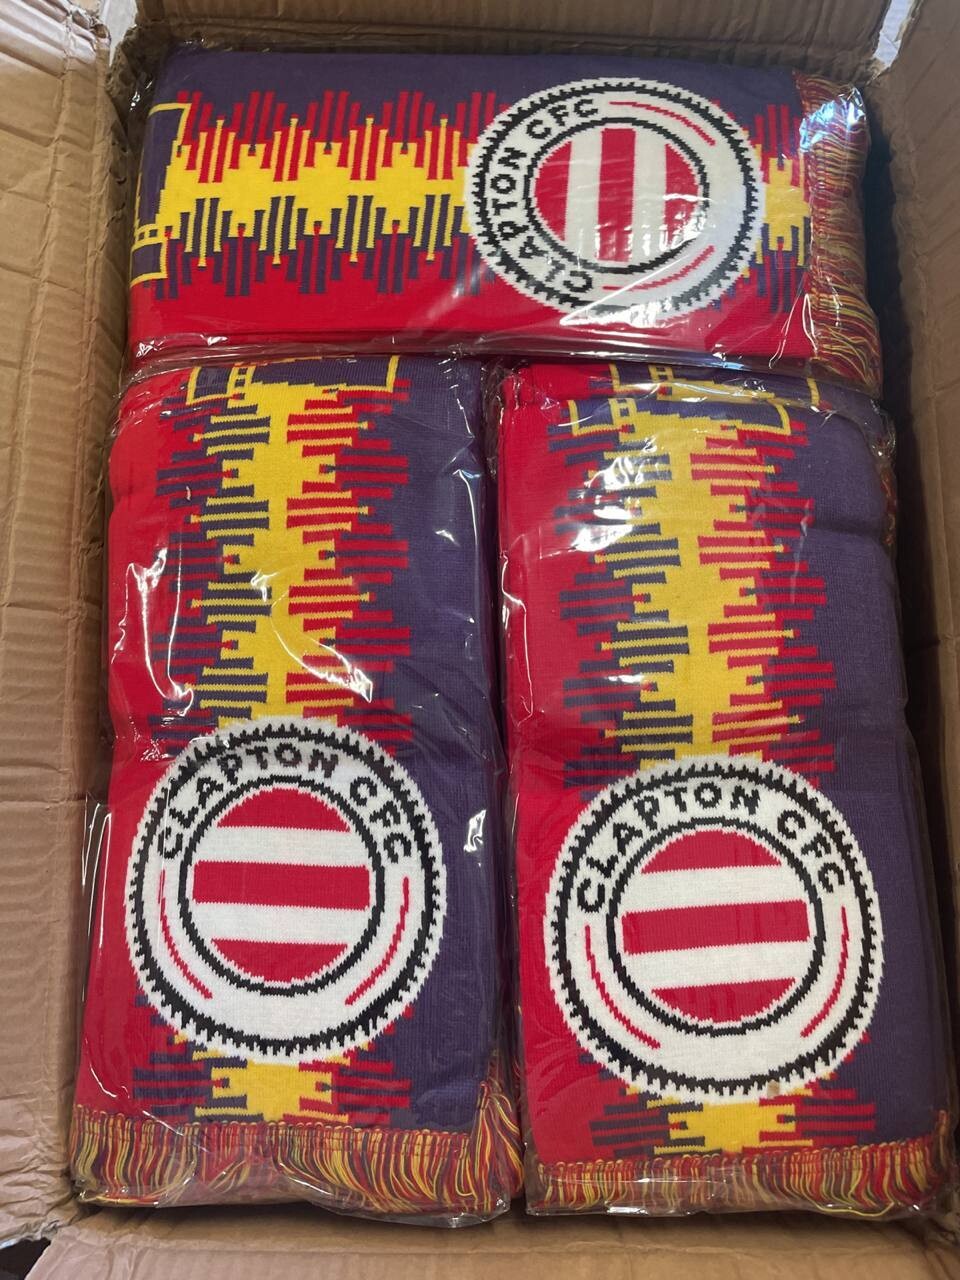 All Products | Store - Clapton Community FC